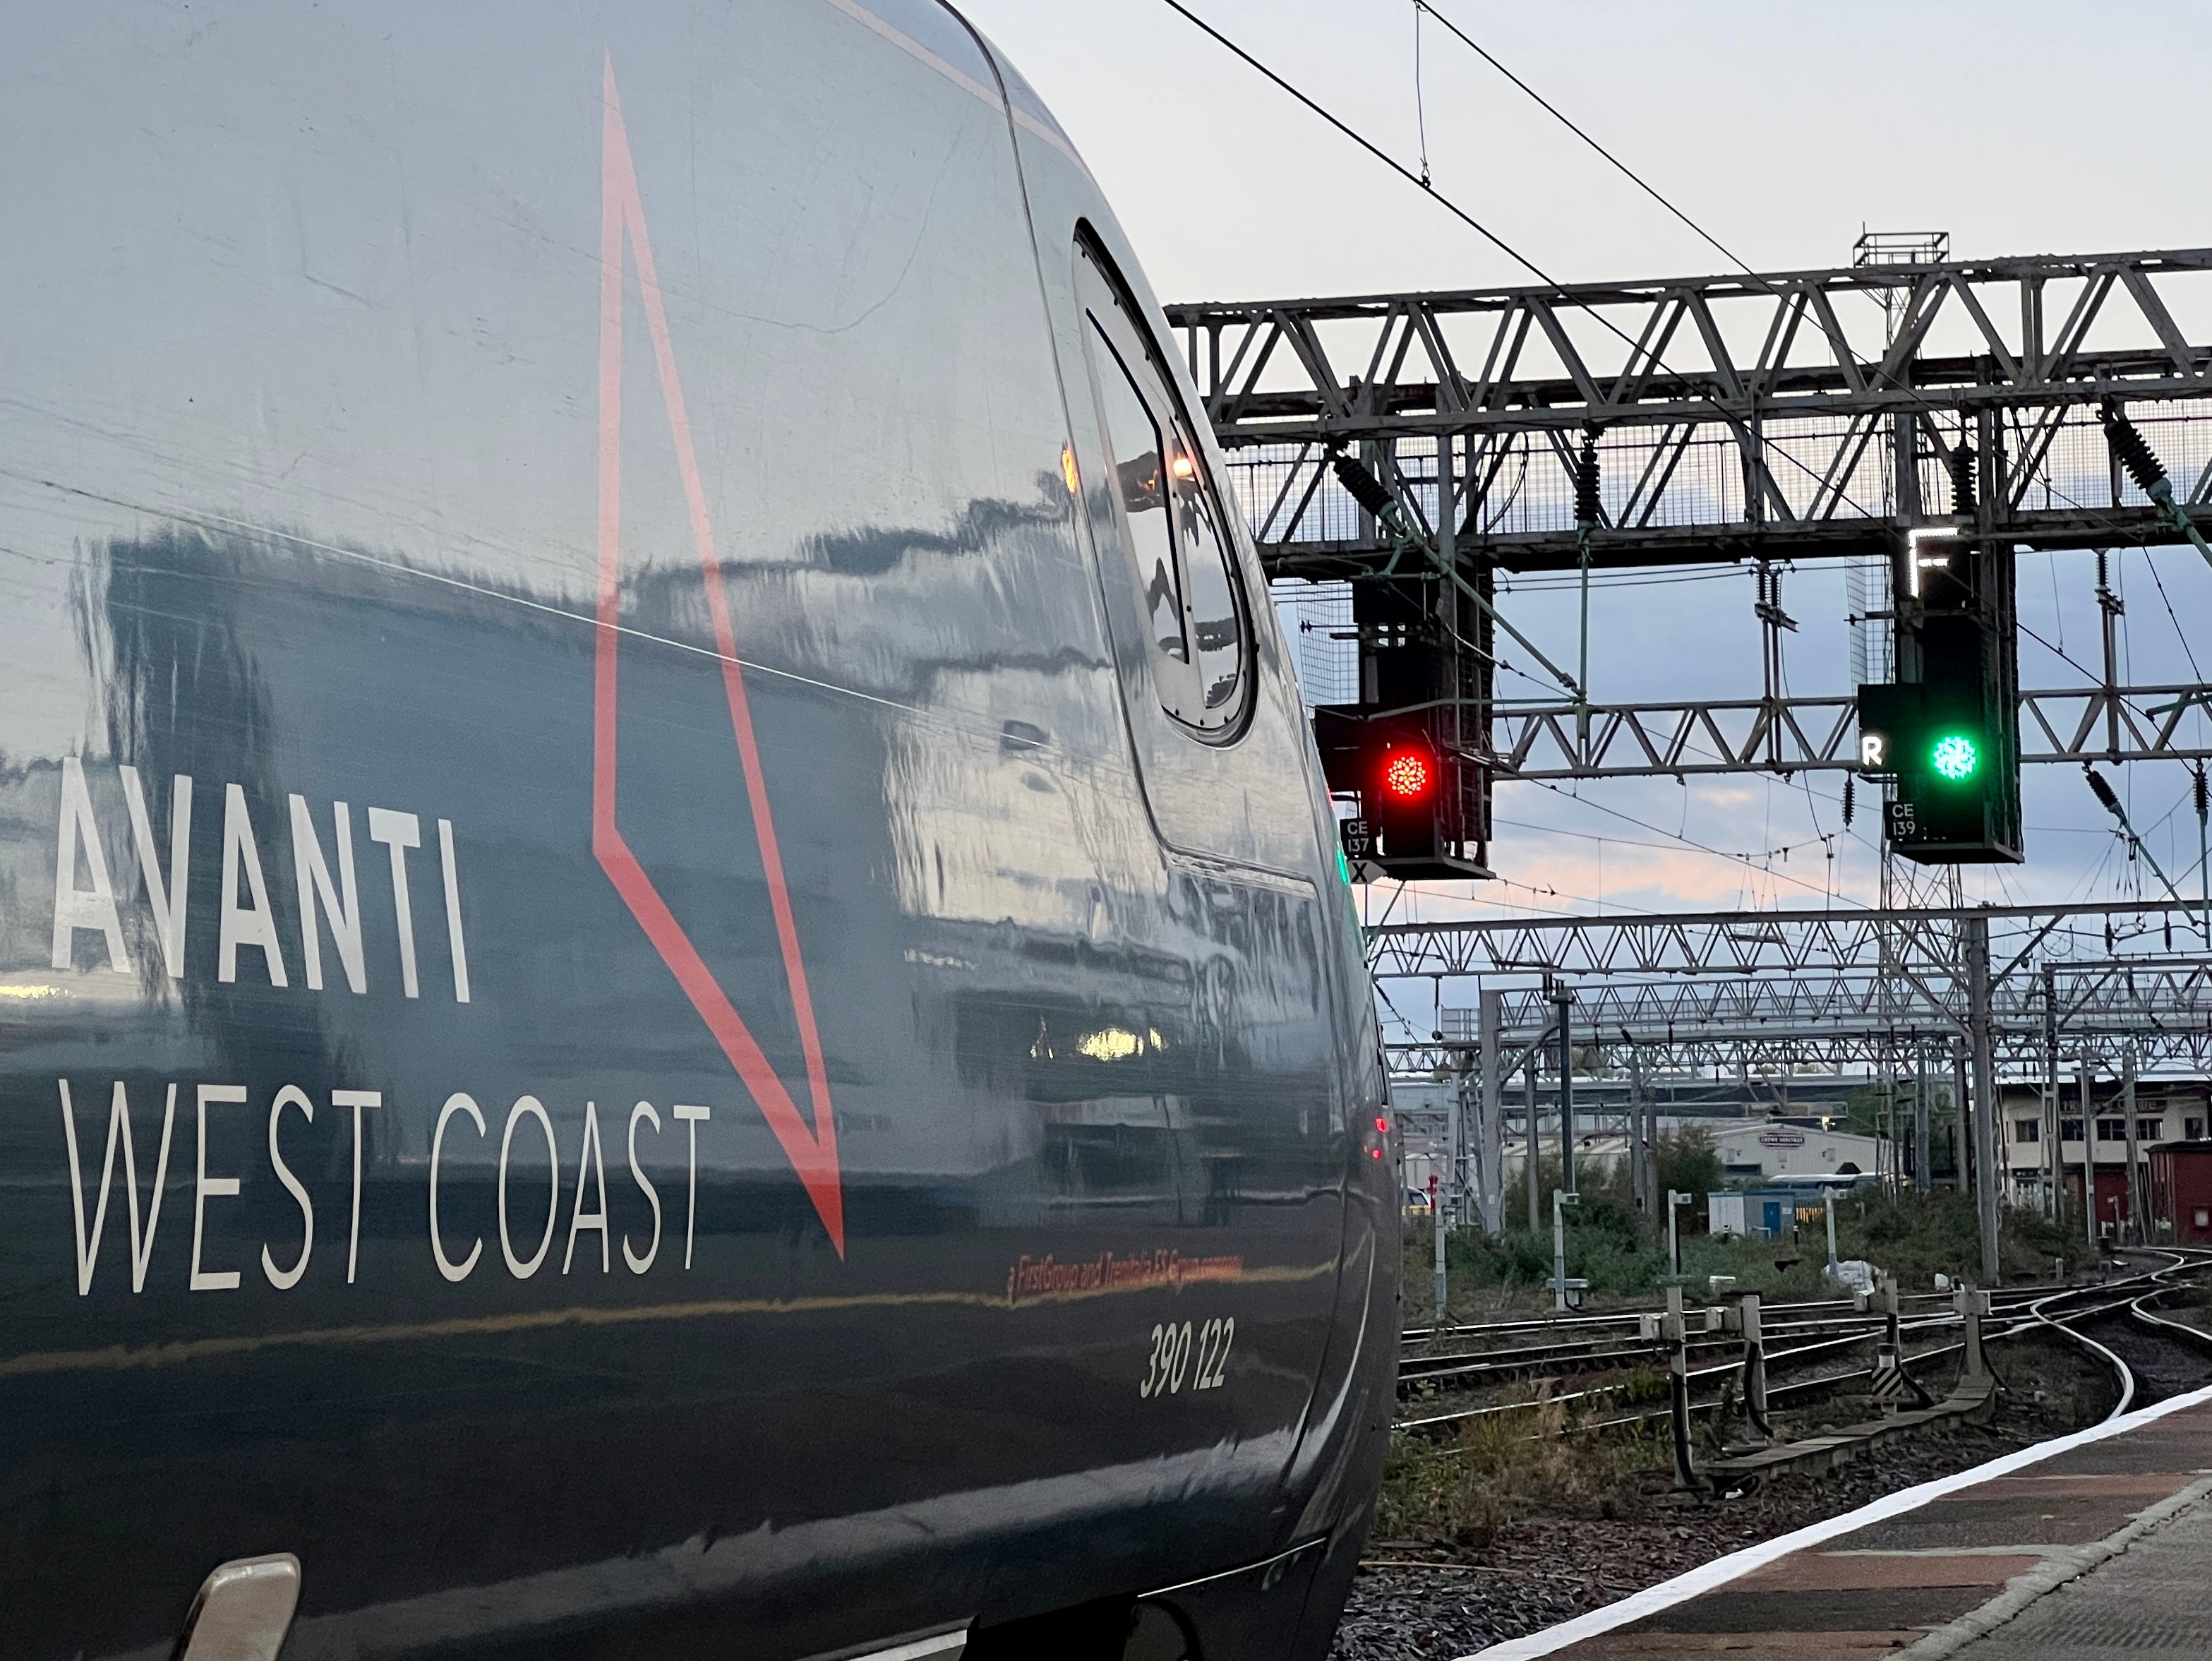 Stop or go? An Avanti West Coast train at Crewe station in Cheshire